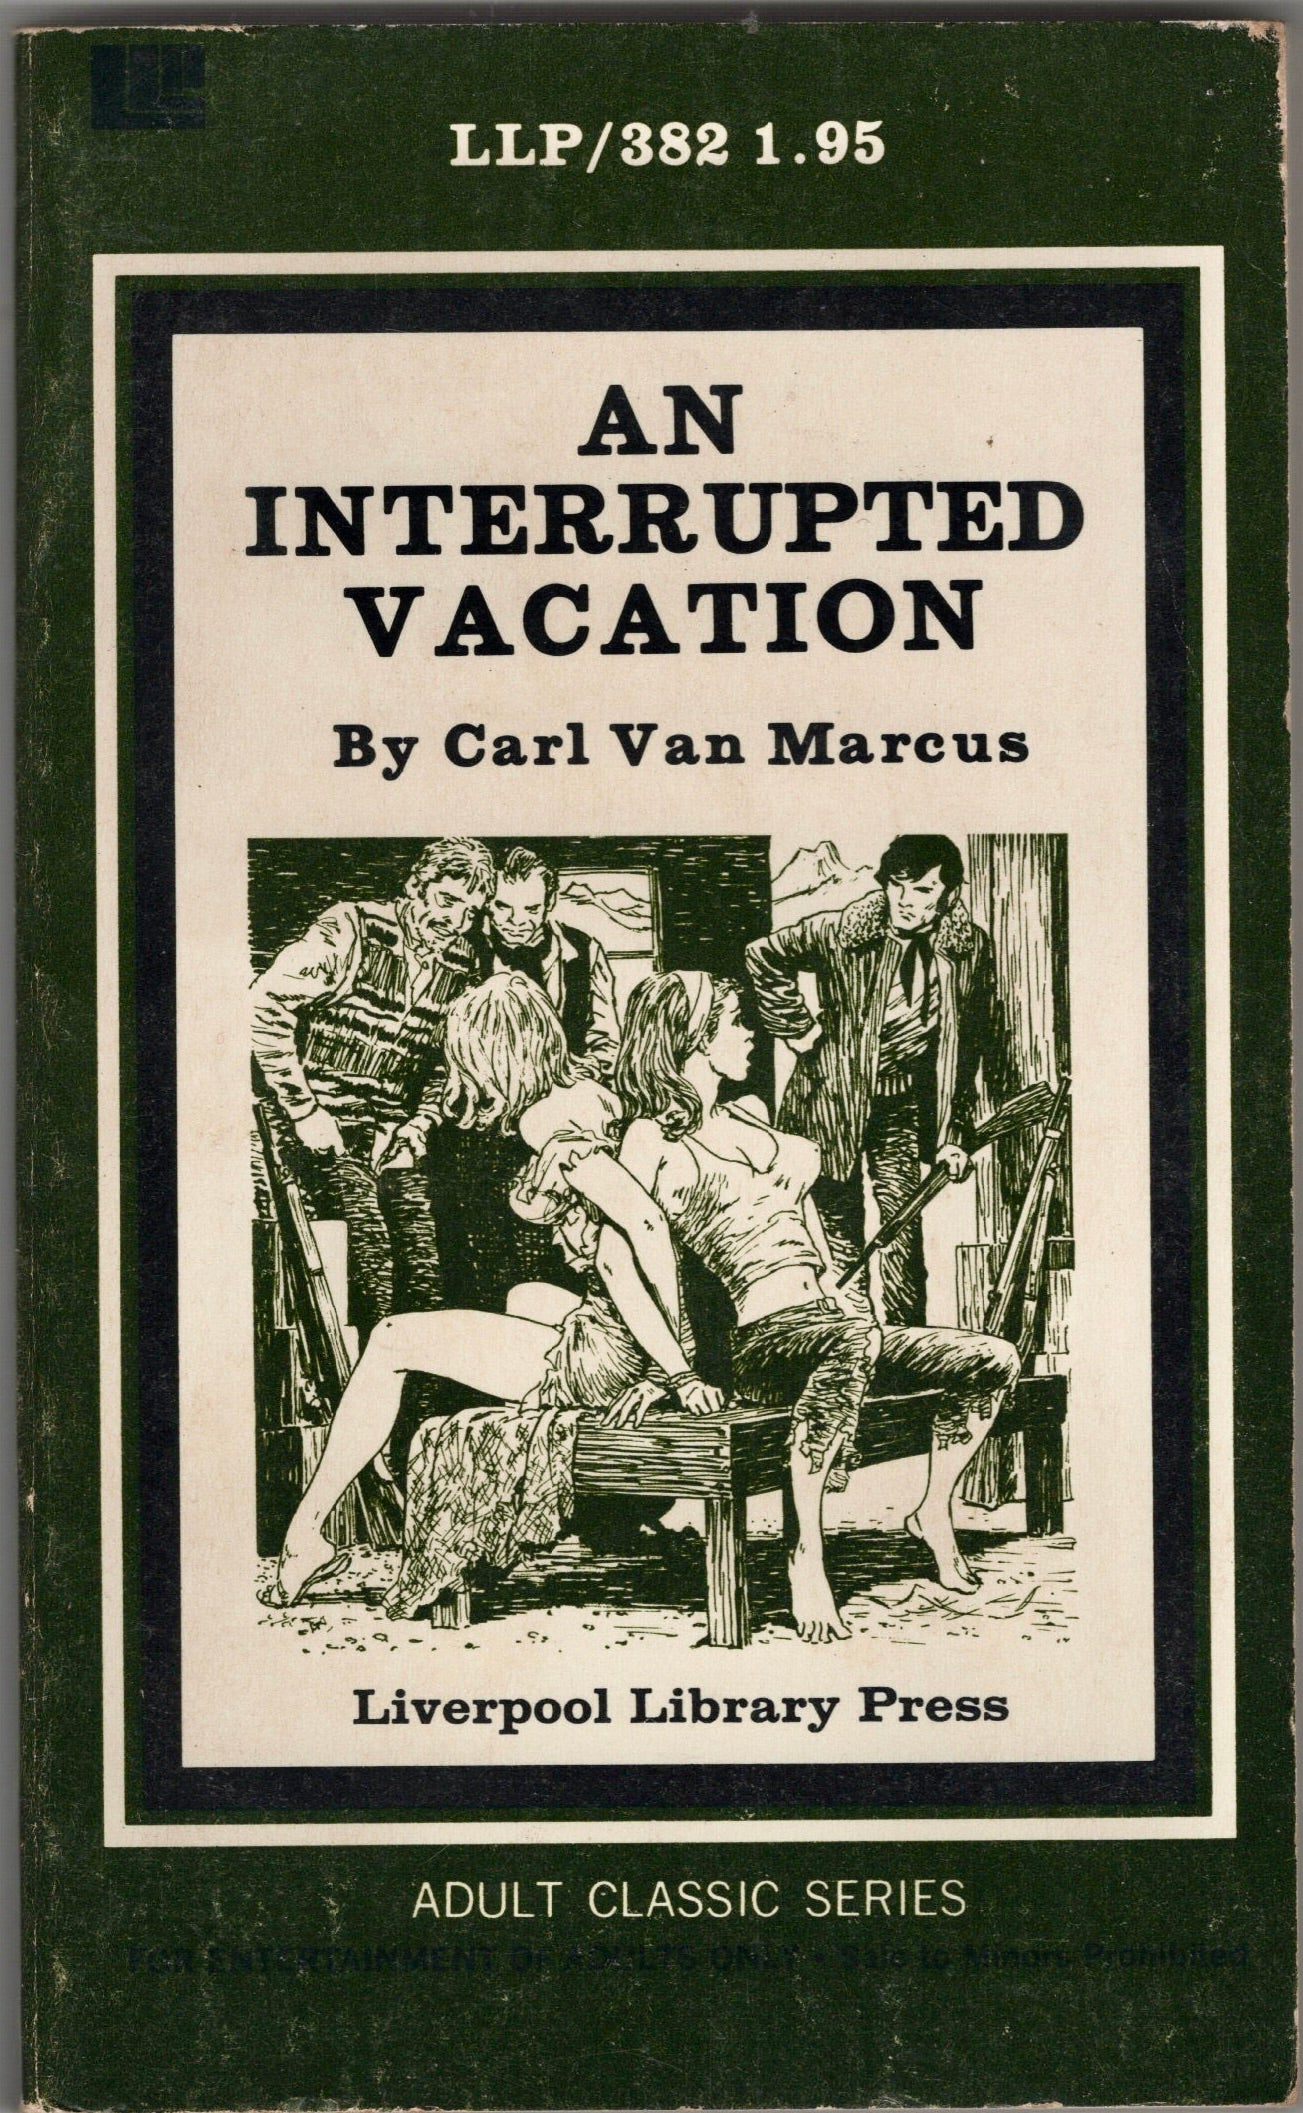 1974 An Interrupted Vacation by, Carl Van Marcus - Liverpool Library Press LLP/382